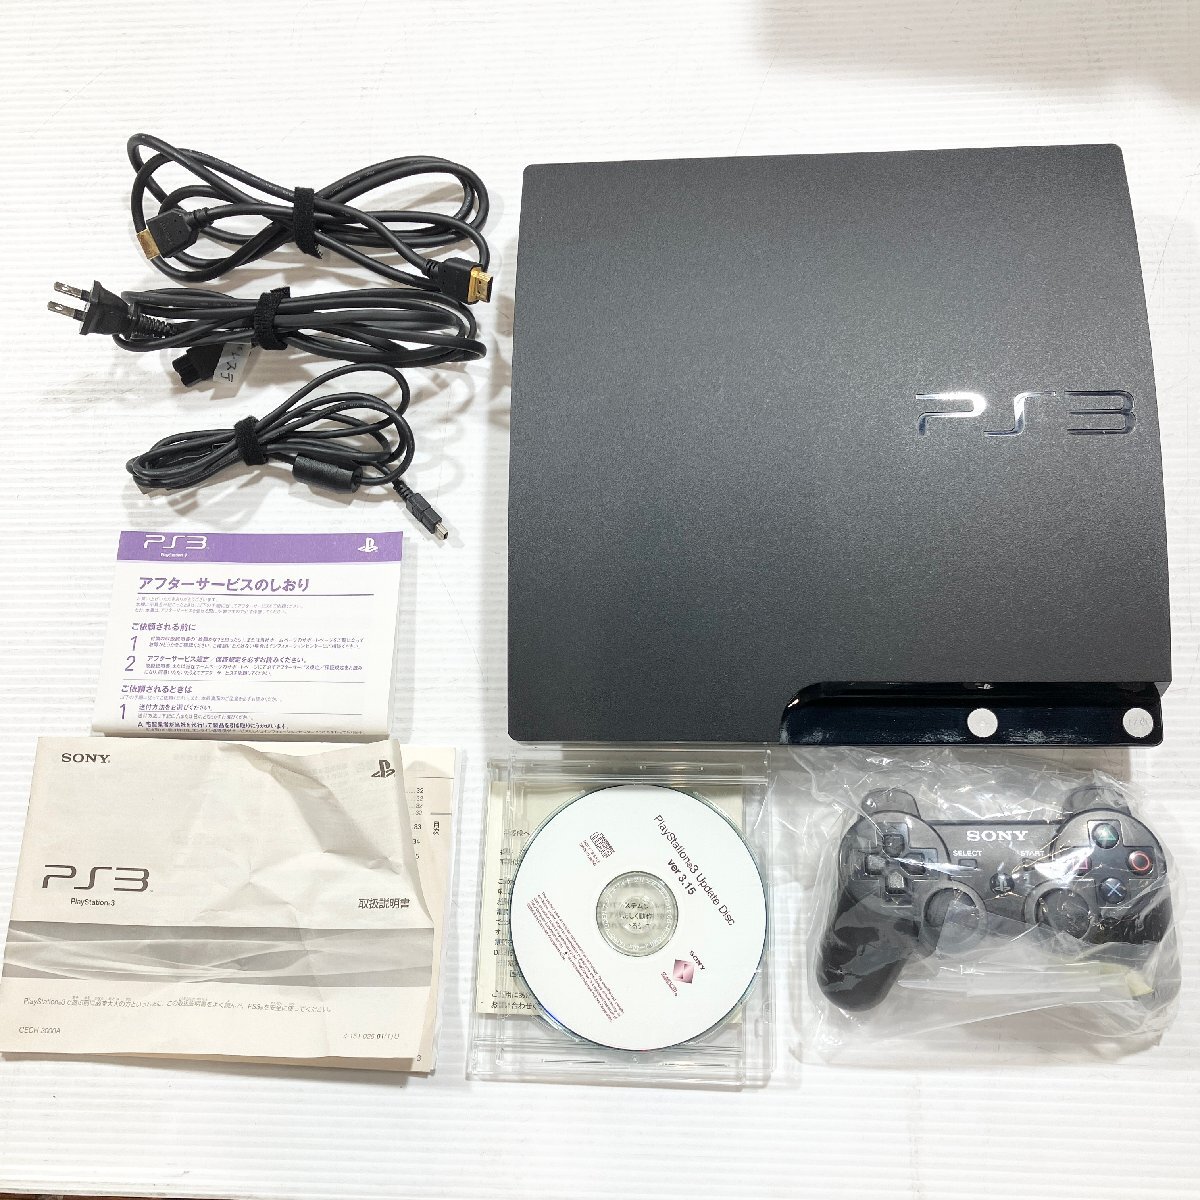 0[ junk ] Play Station PlayStation all sorts body 8 pcs soft 10ps.@PS PS3 PS4 approximately 24.9kg present condition goods ff ()K/60423/1/24.9